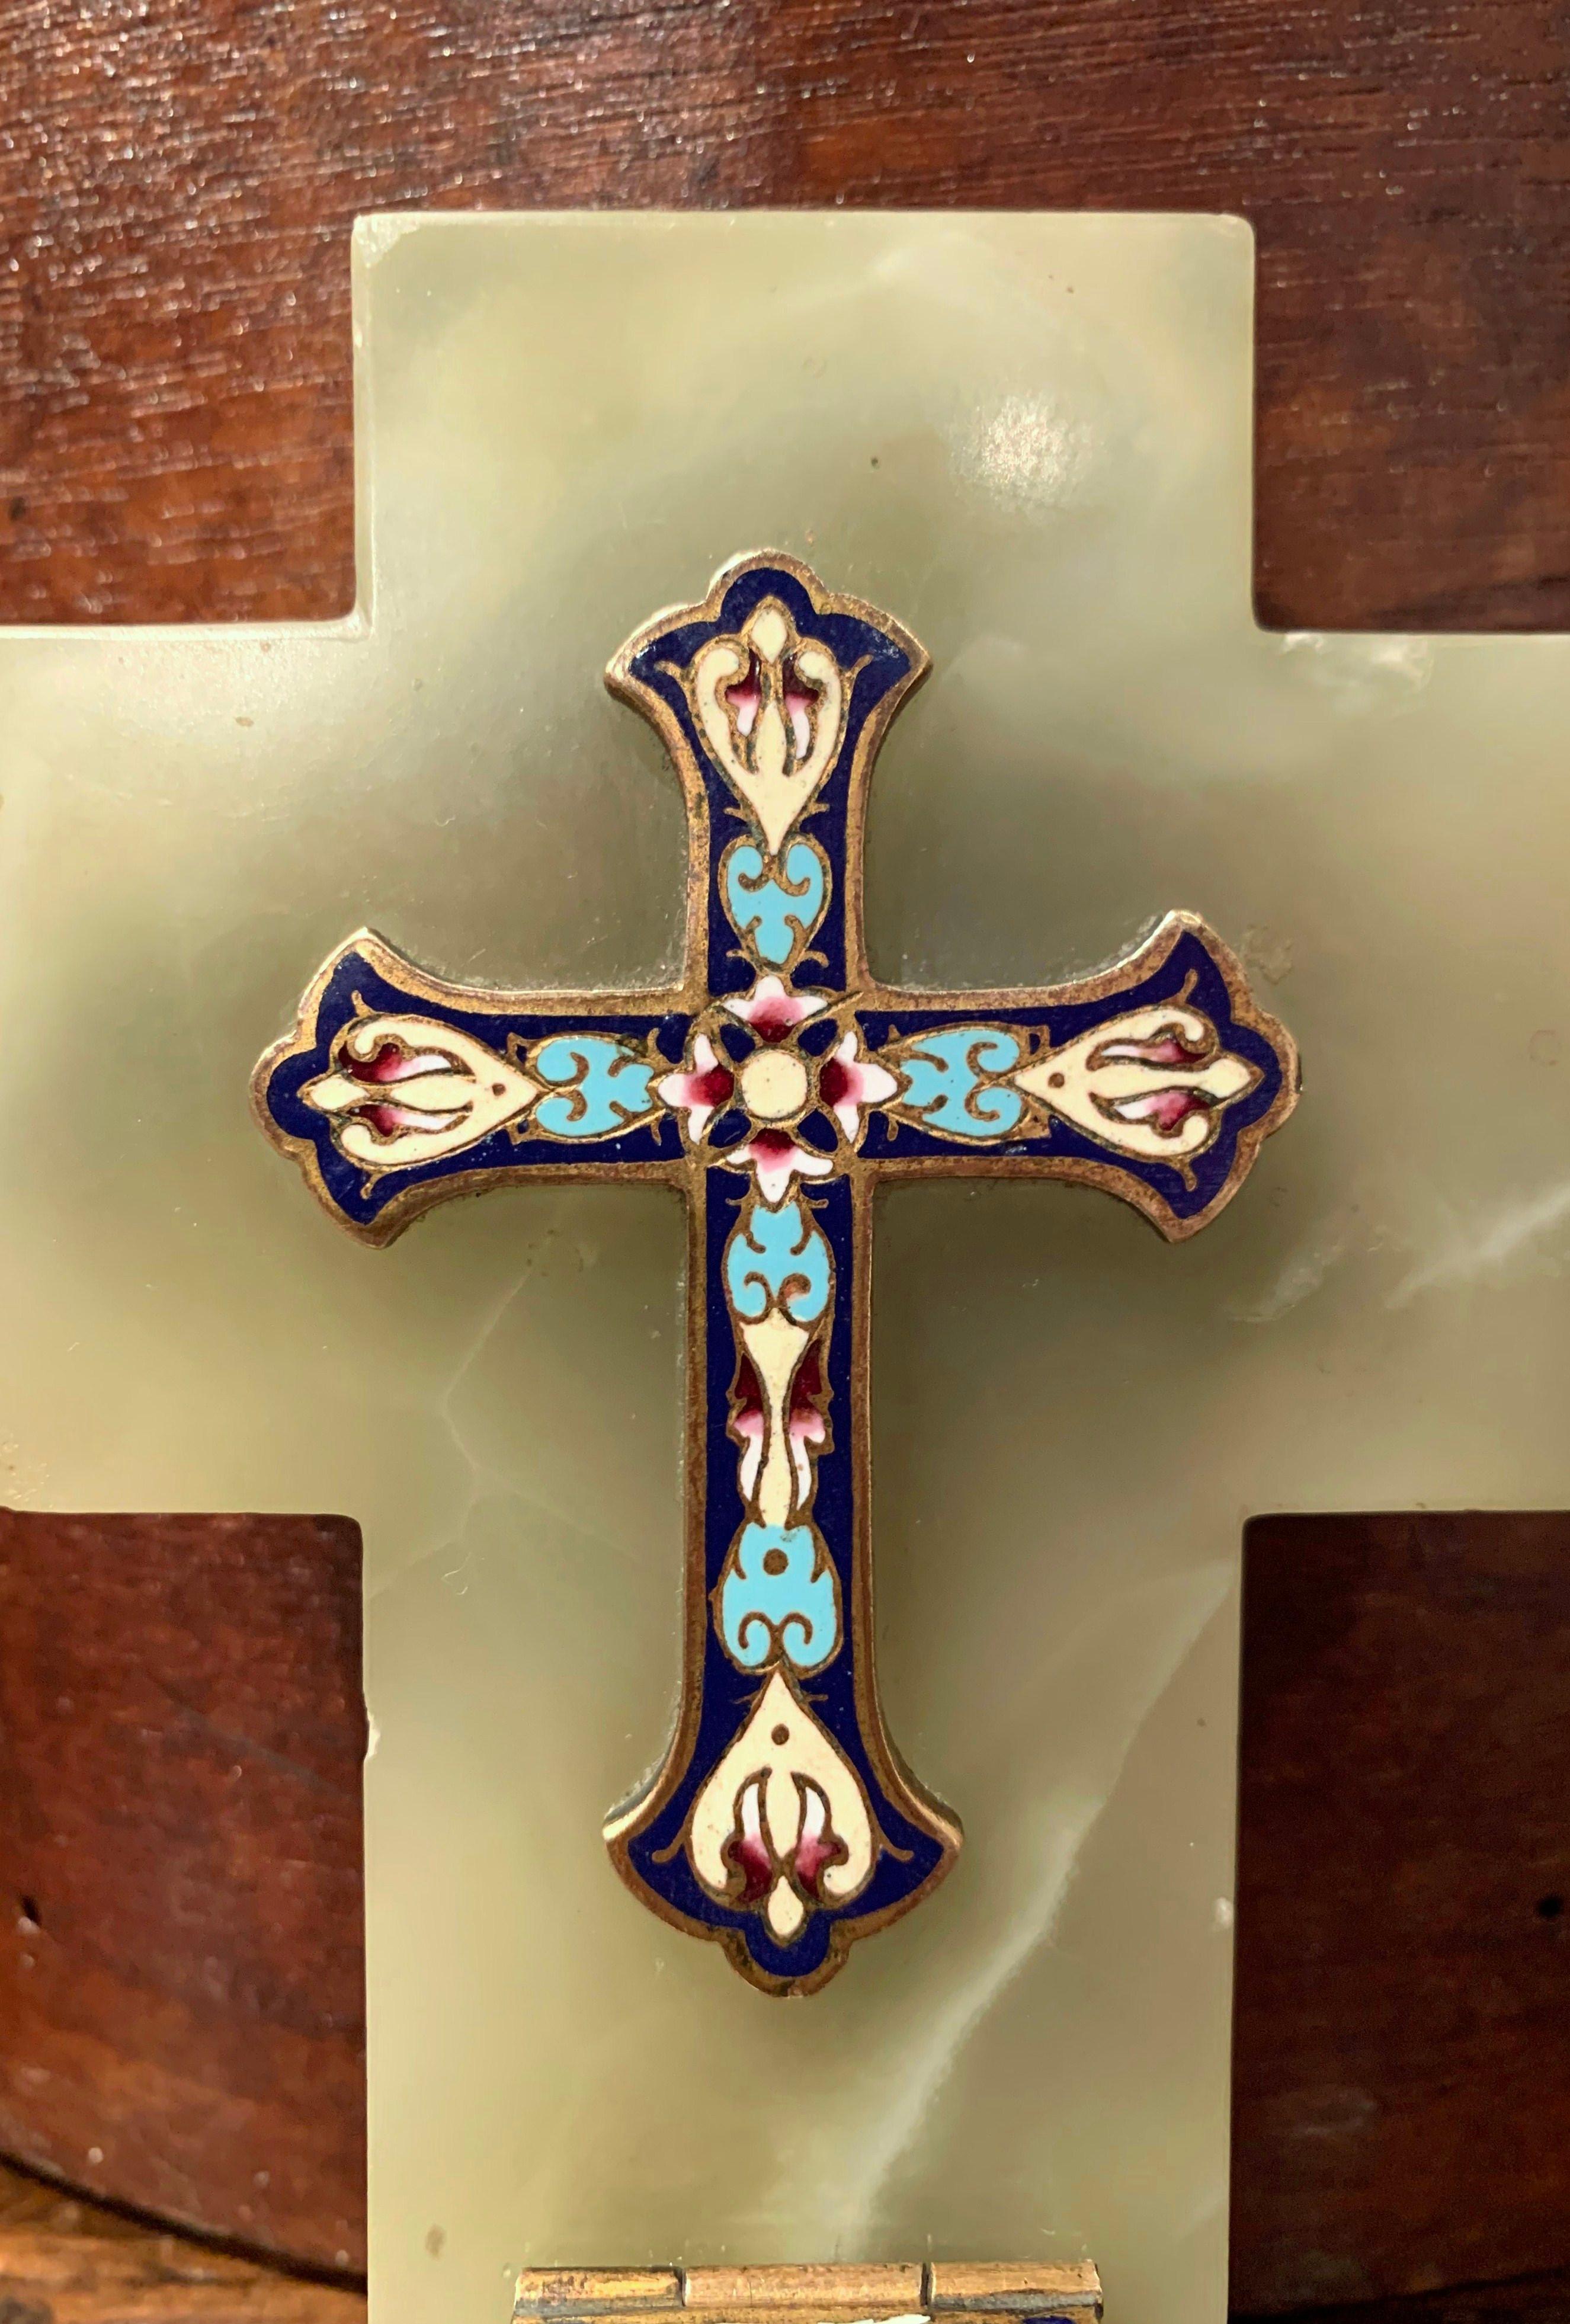 This colorful marble and brass cross with holy water recipient was created in France, circa 1880. The antique cross features beautiful, intricate cloisonné work with enamel, stone and bronze and is mount on a gleaming green marble plaque. Cloisonné